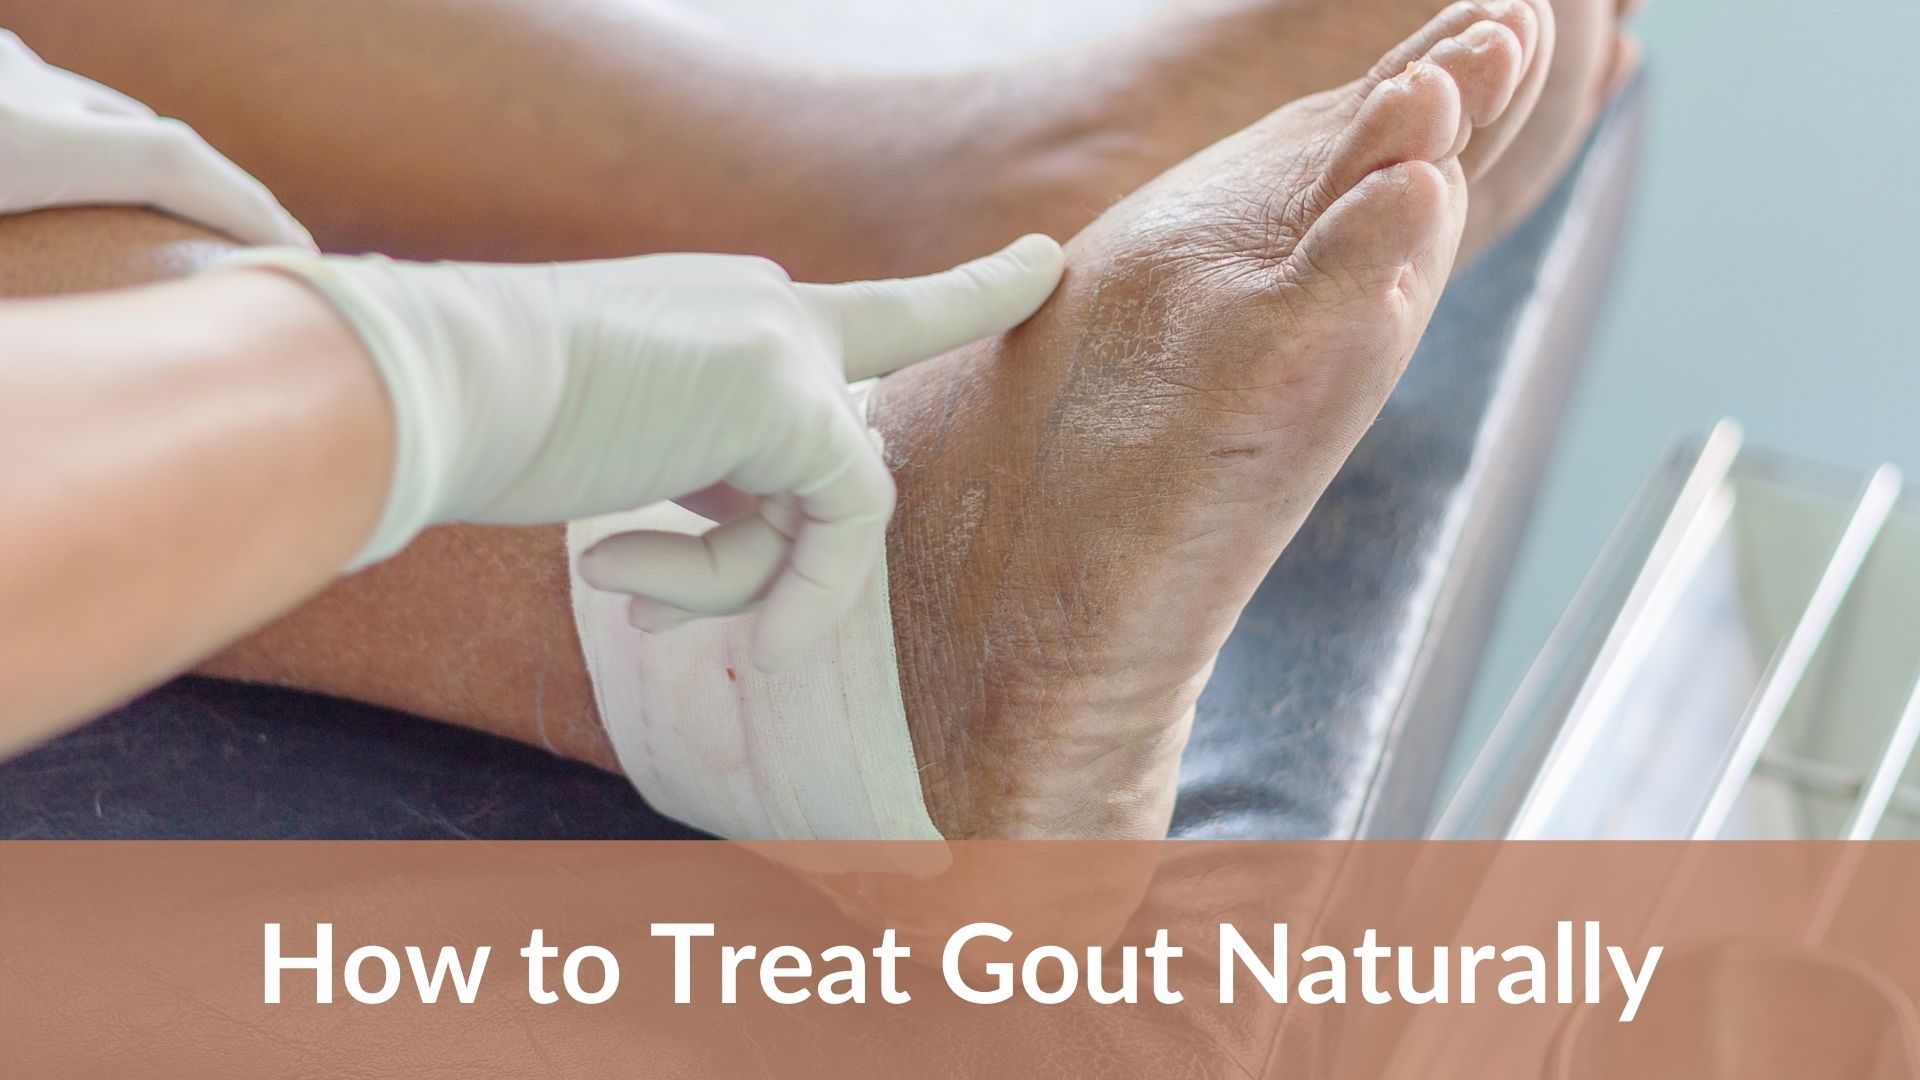 How to Treat Gout at Home